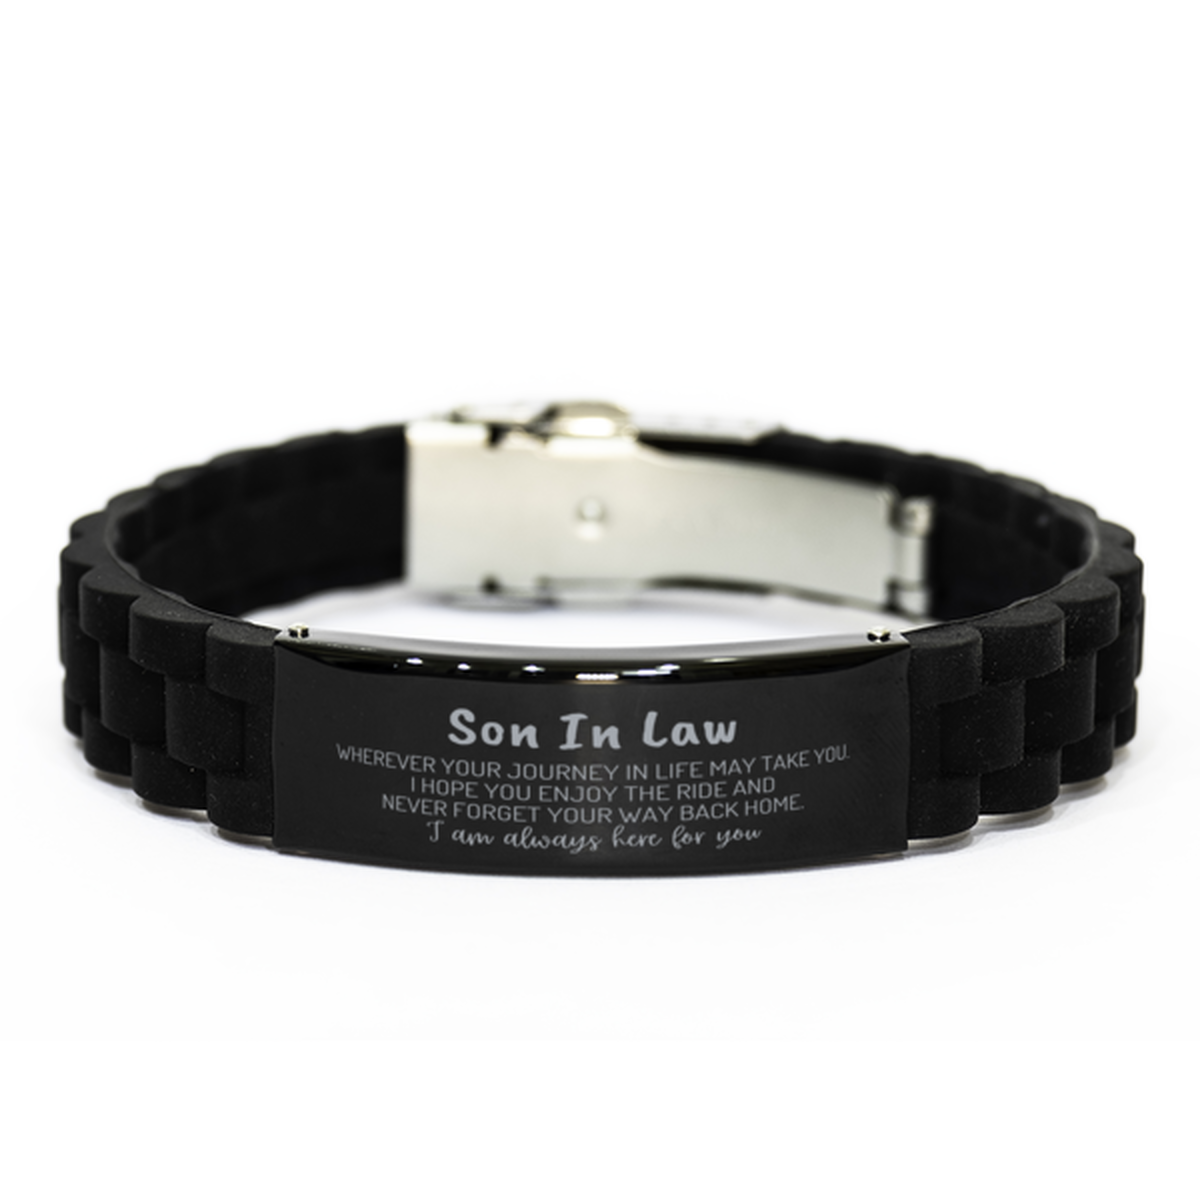 Son In Law wherever your journey in life may take you, I am always here for you Son In Law Black Glidelock Clasp Bracelet, Awesome Christmas Gifts For Son In Law, Son In Law Birthday Gifts for Men Women Family Loved One